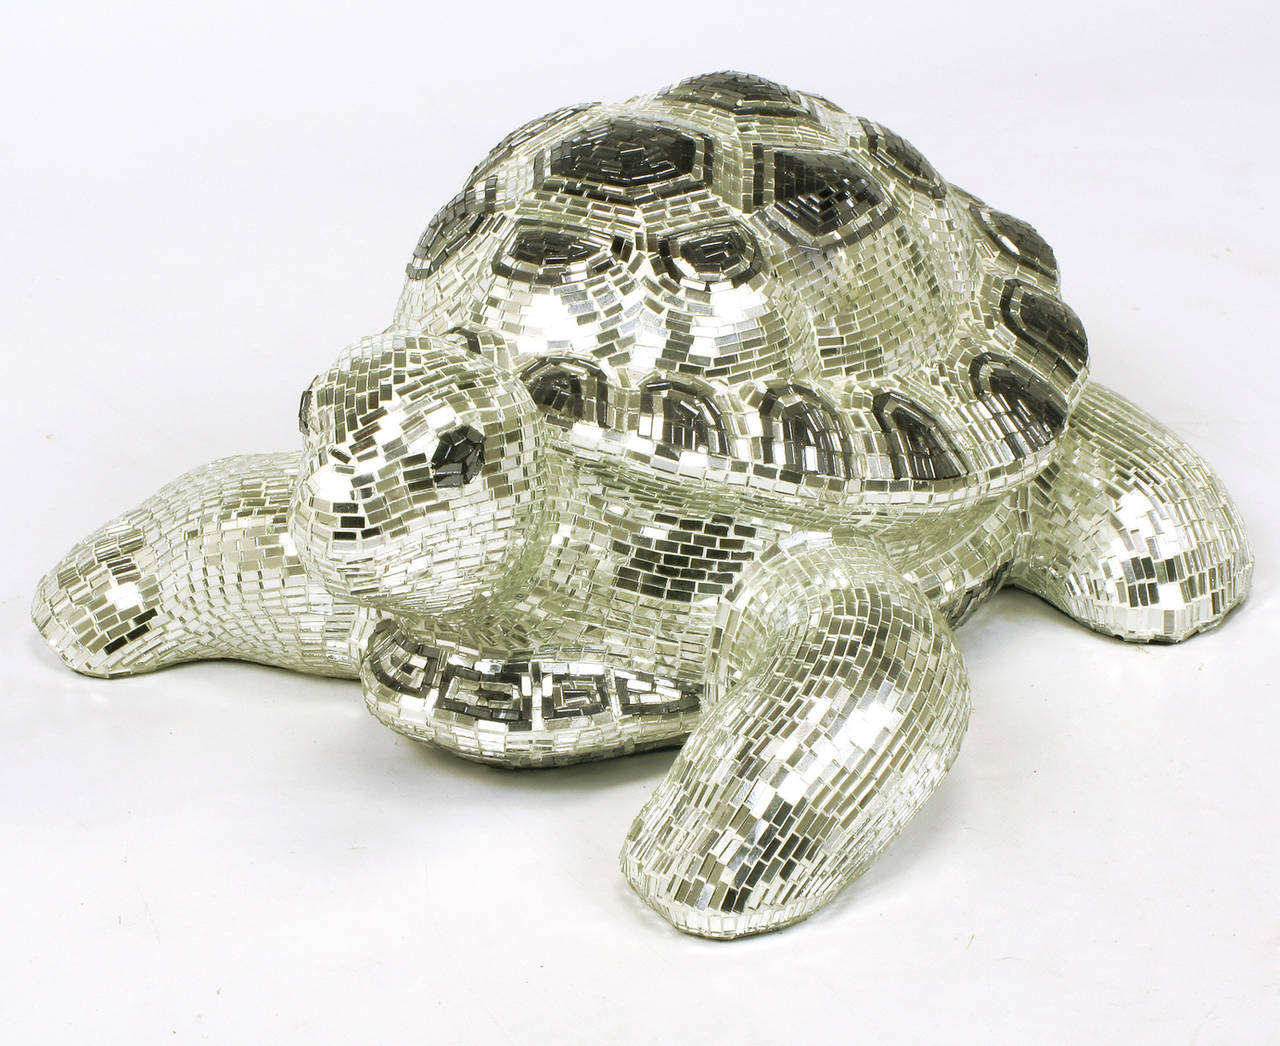 Tessellated sliver and black mirror tortoise sculpture. Plaster cast tortoise with thousands of tiny mirrored tiles. Lifesize at 18